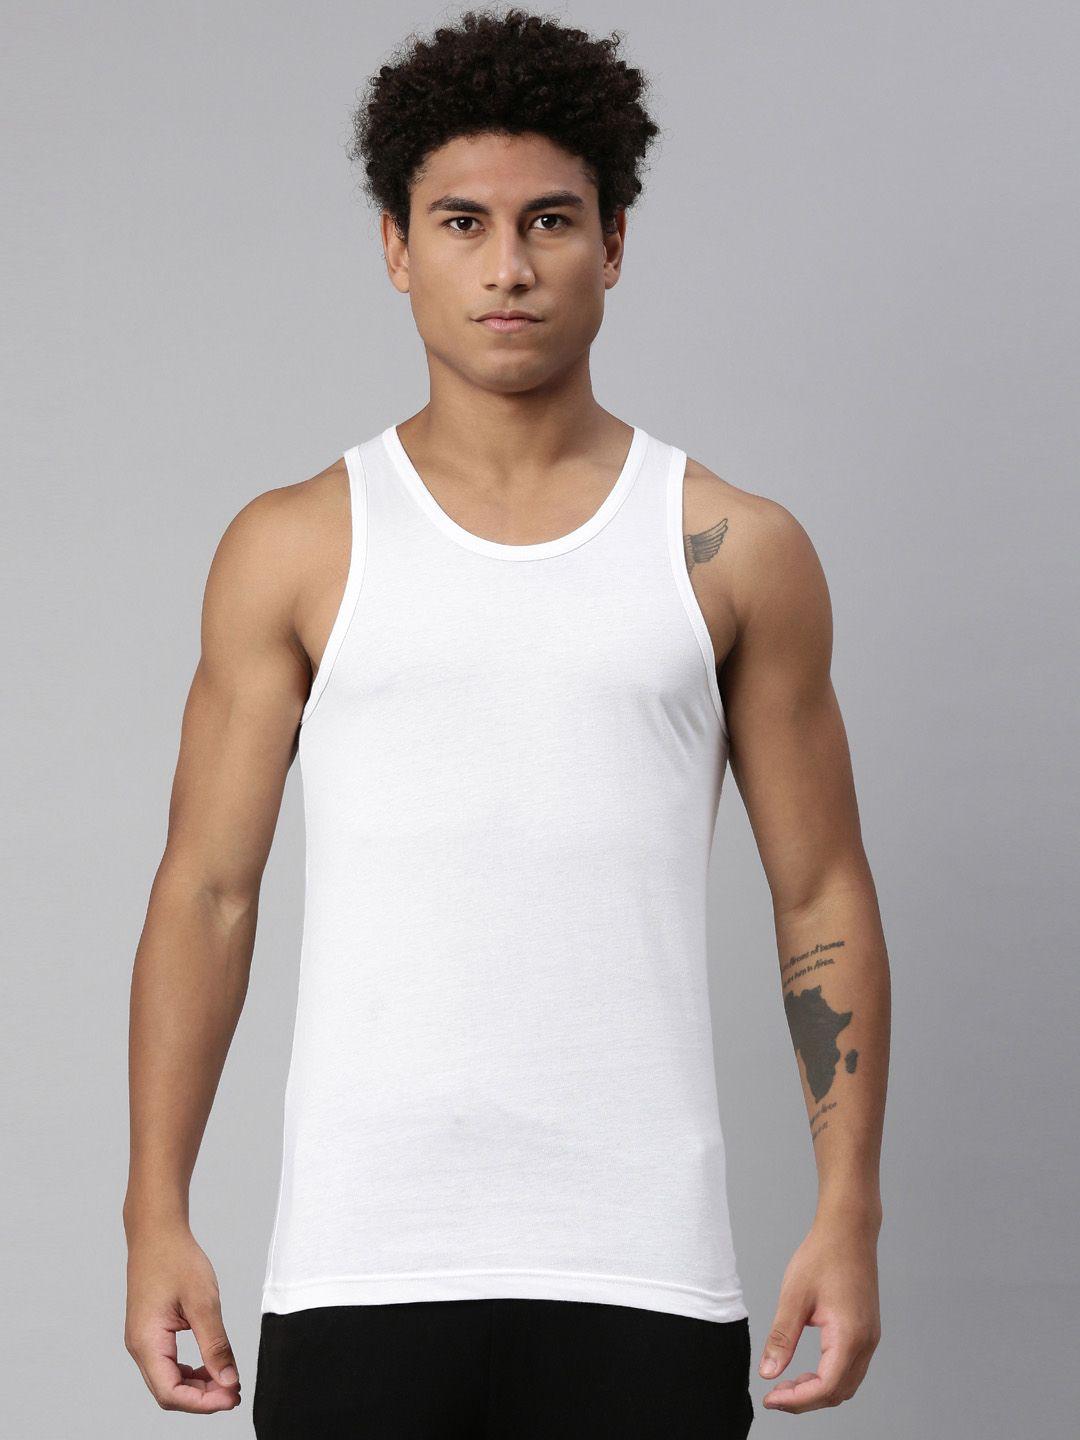 levis-smartskin-technology-pure-cotton-classic-vests-with-tag-free-comfort-012